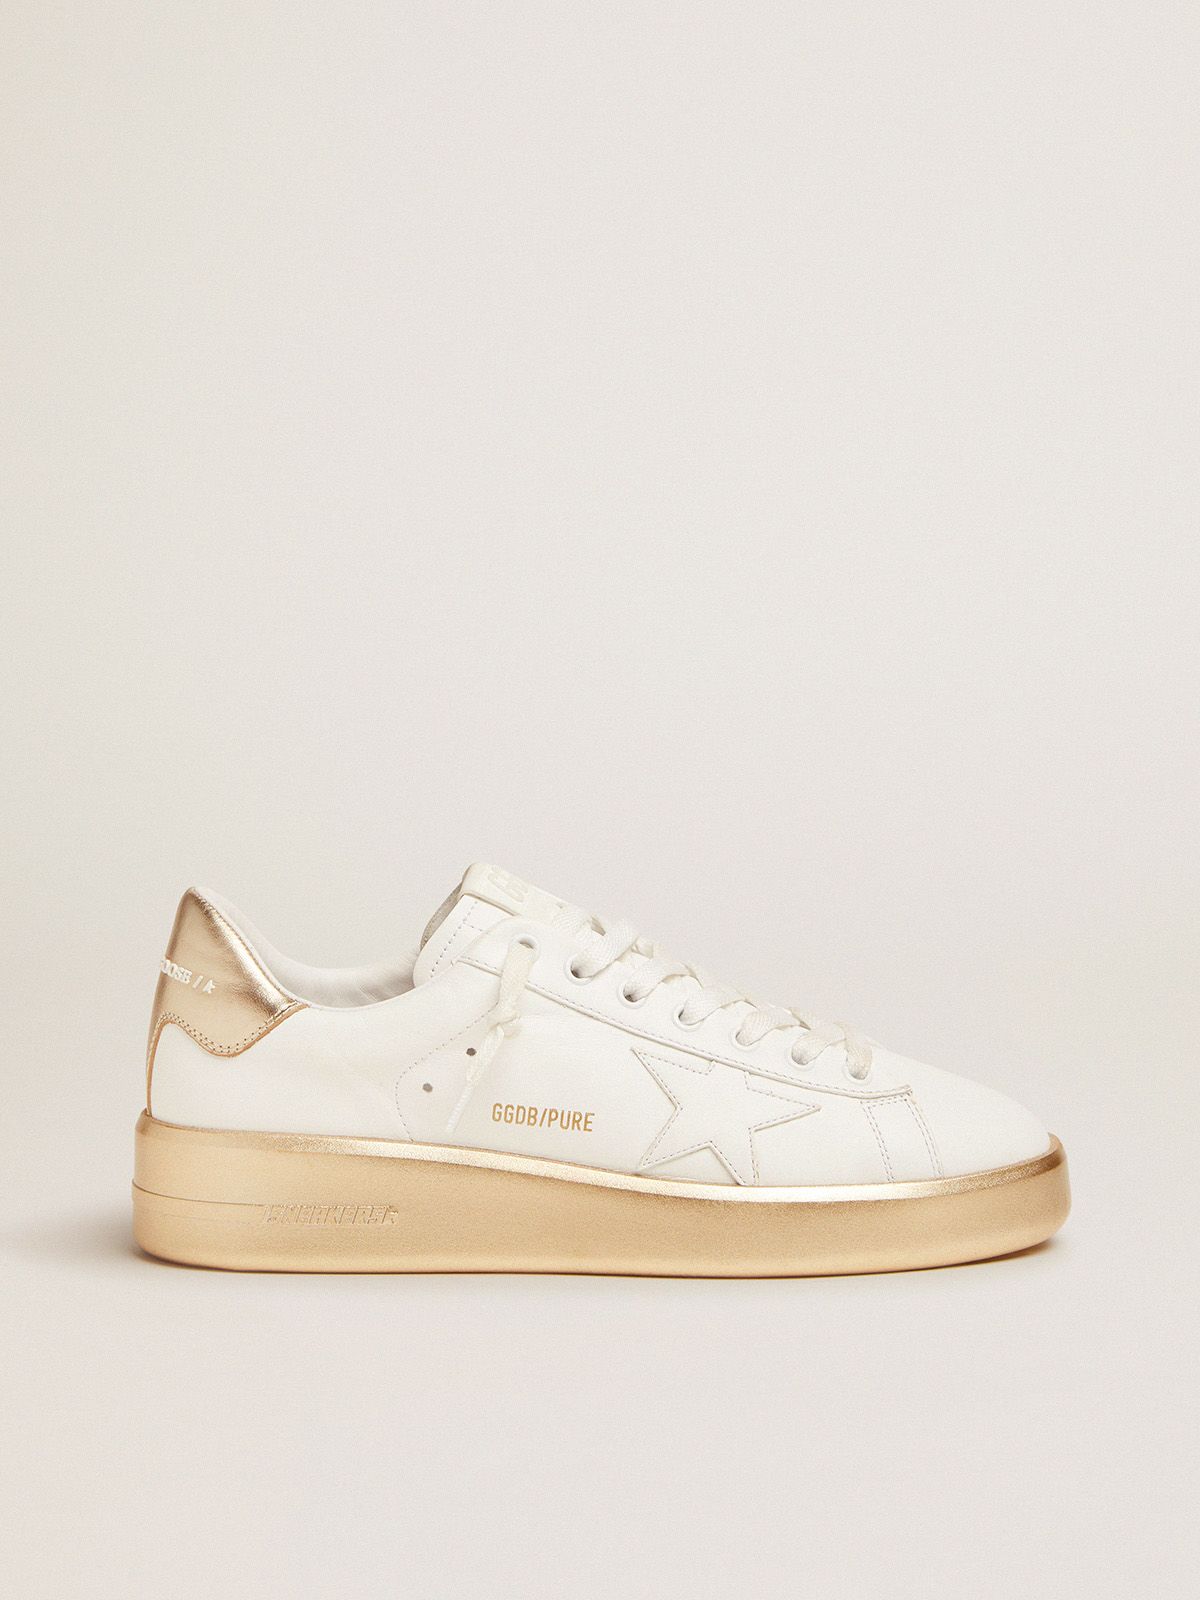 golden goose tab Purestar heel sneakers laminated in foxing leather gold and with white